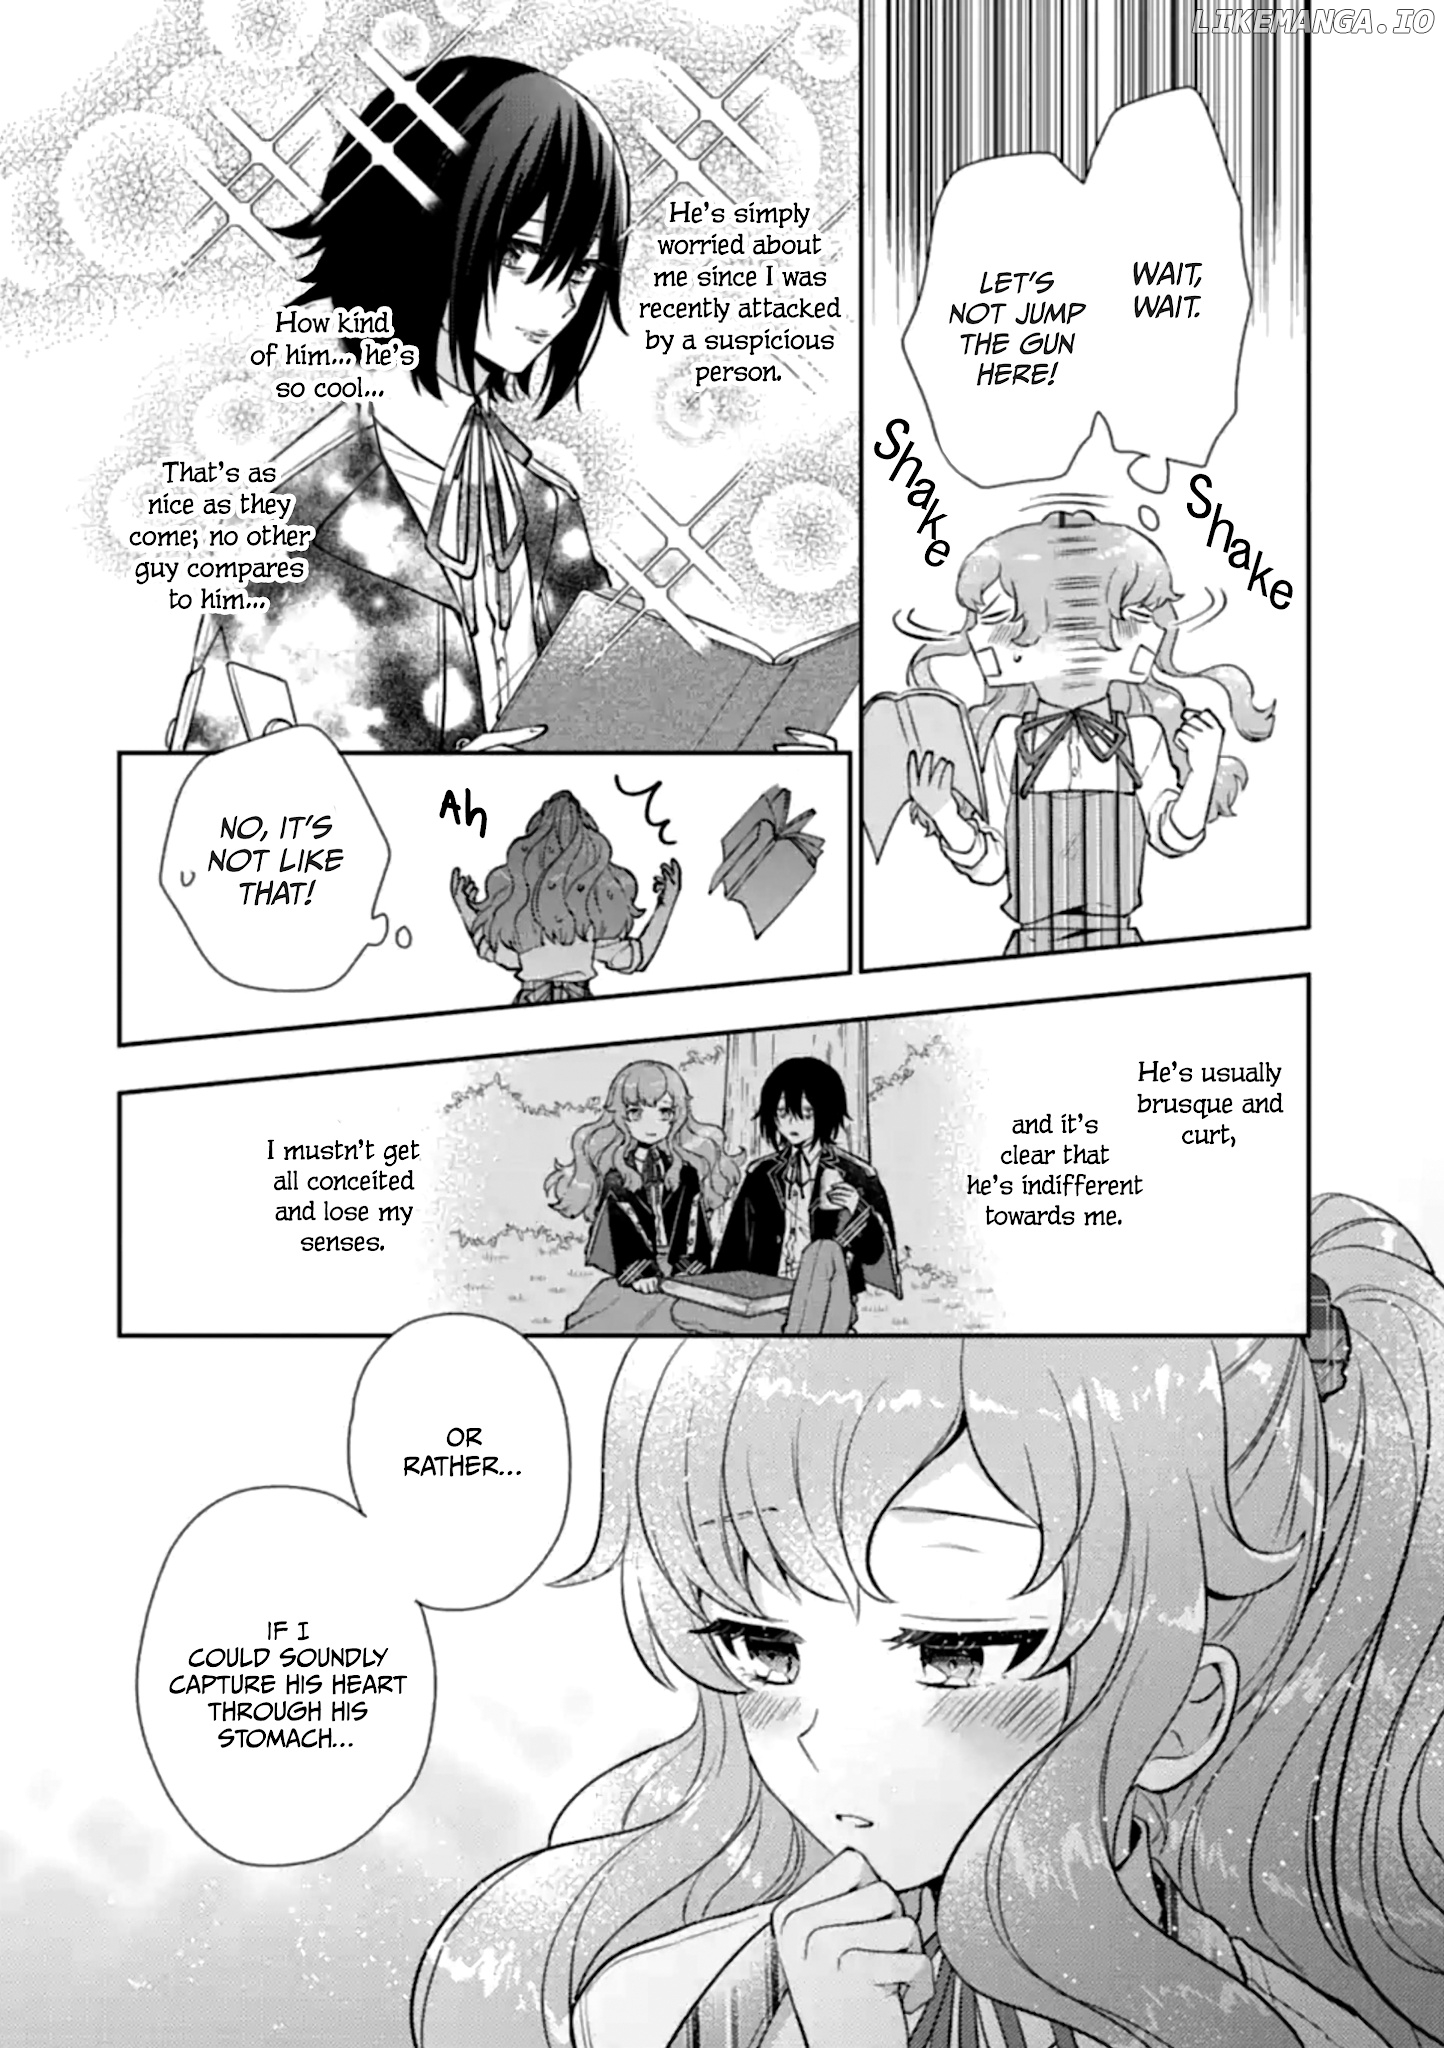 The Noble Girl With a Crush on a Plain and Studious Guy Finds the Arrogant Prince to be a Nuisance chapter 1.2 - page 11